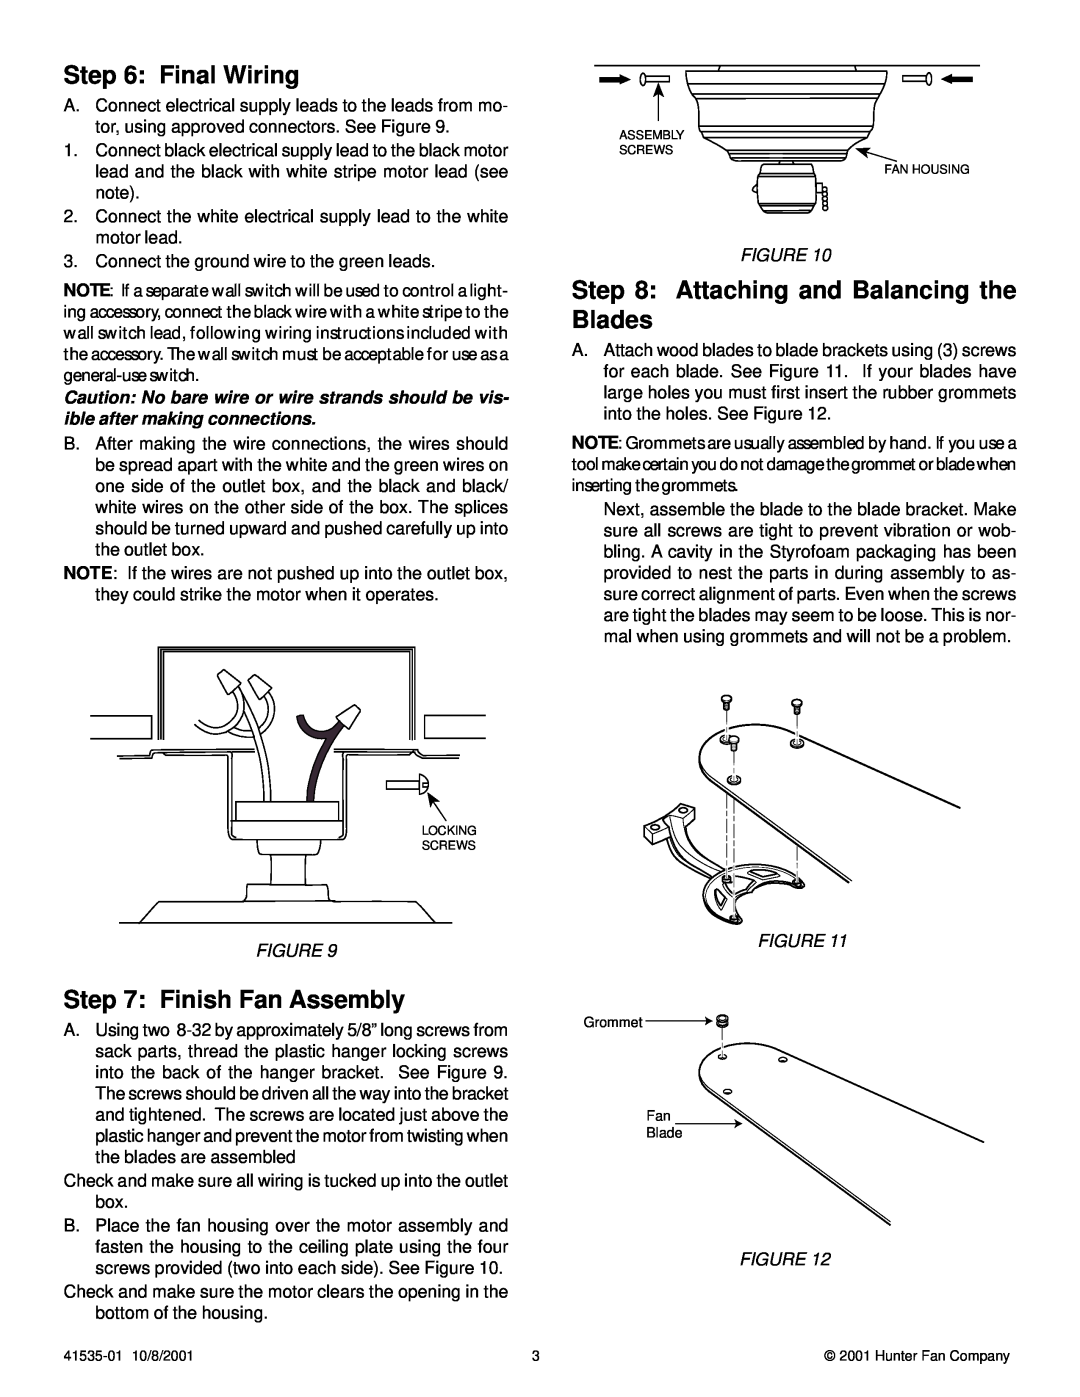 Hunter Fan 41535-01 installation instructions Final Wiring, Attaching and Balancing the Blades, Finish Fan Assembly 